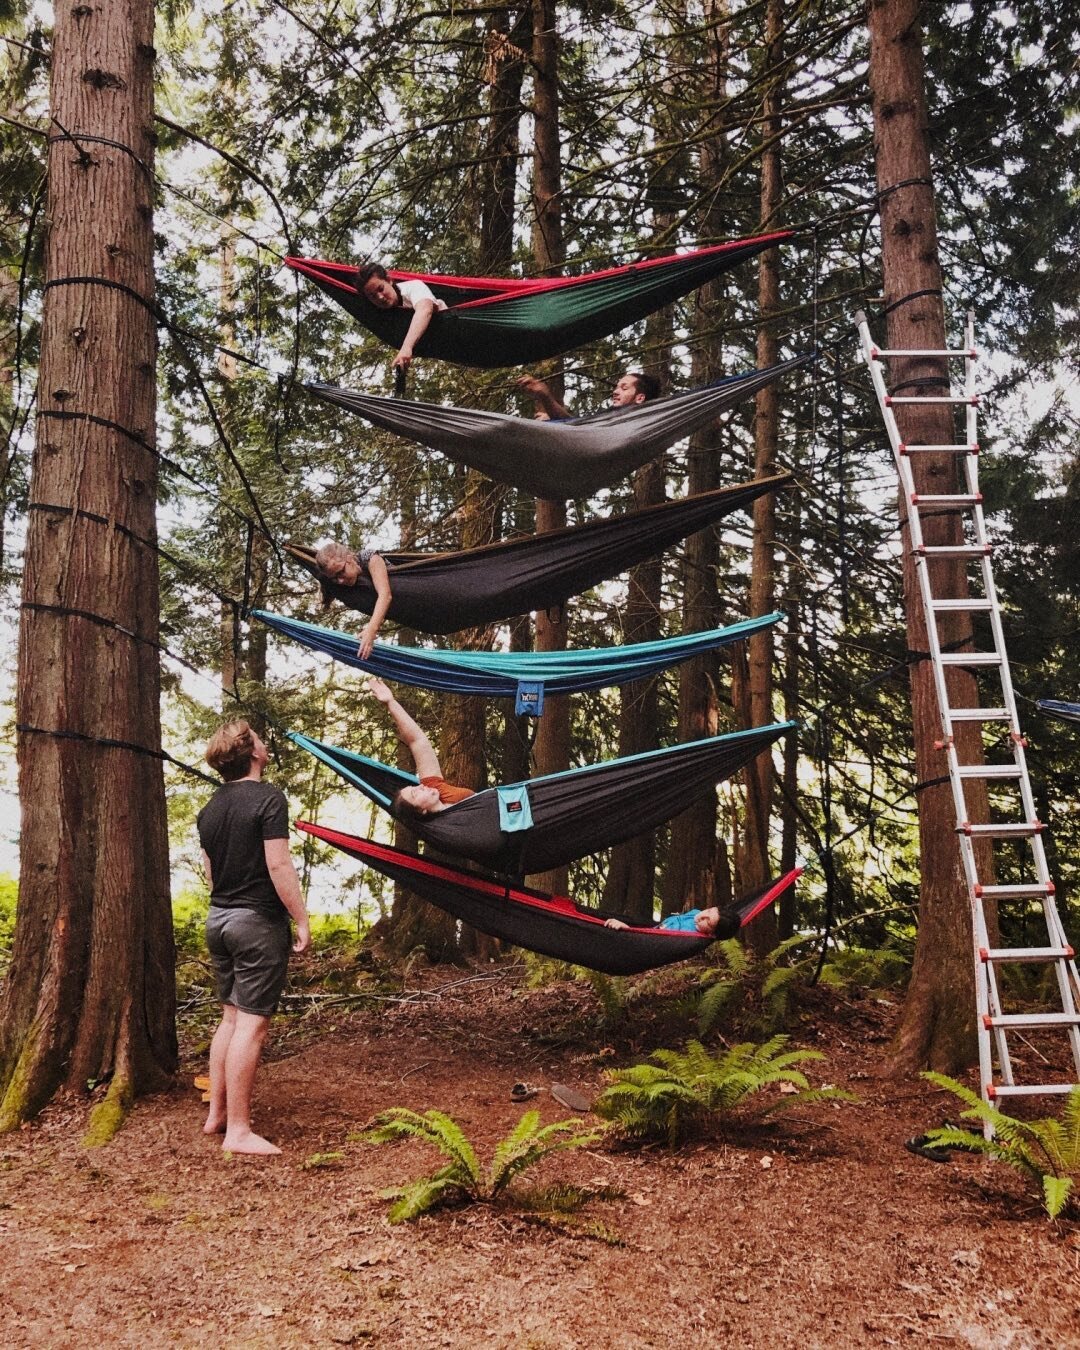 This summer may be the summer to build another crazy hammock tower&hellip;? Come be apart of summer staff and make it happen! 

Apply today on our website